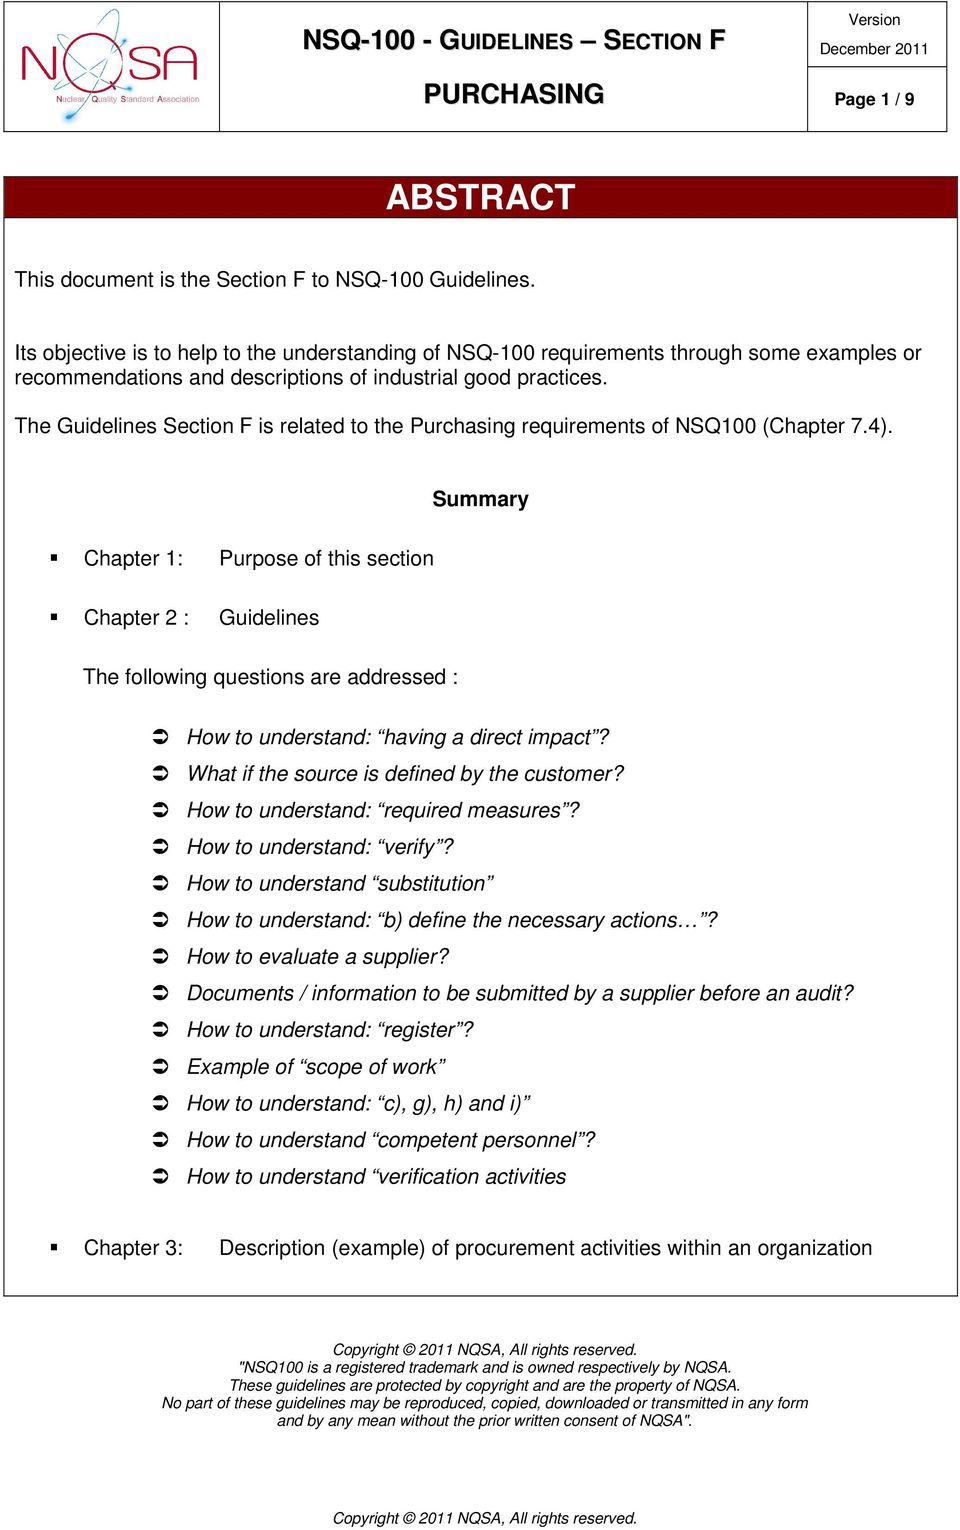 The Guidelines Section F is related to the Purchasing requirements of NSQ100 (Chapter 7.4).